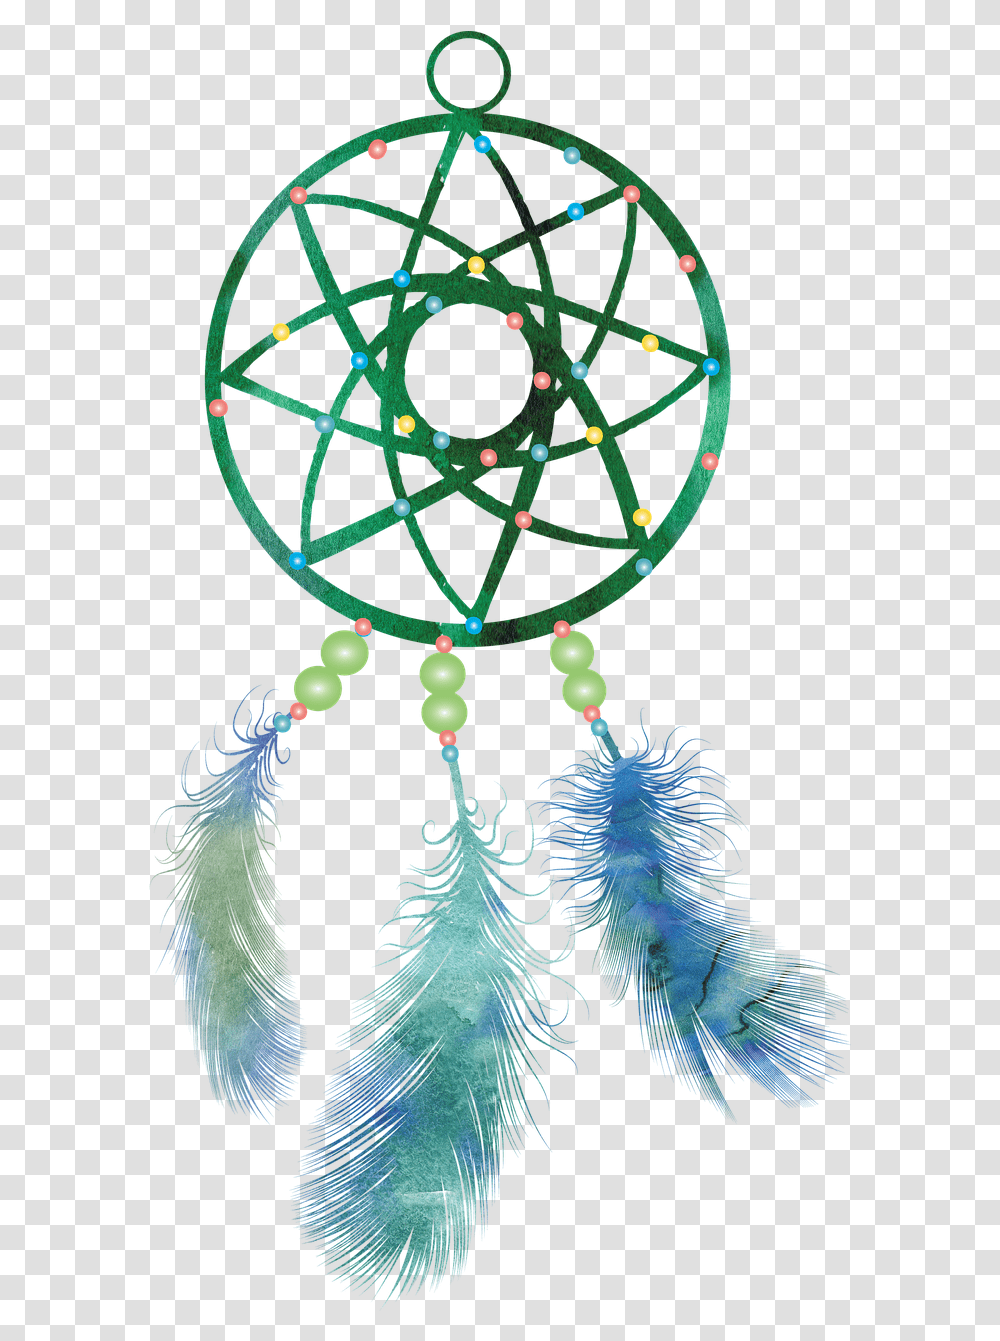 Dreamcatcher Watercolor Feathers Free Image On Pixabay Dessin Attrape Reve Facile, Ornament, Tree, Plant, Pattern Transparent Png